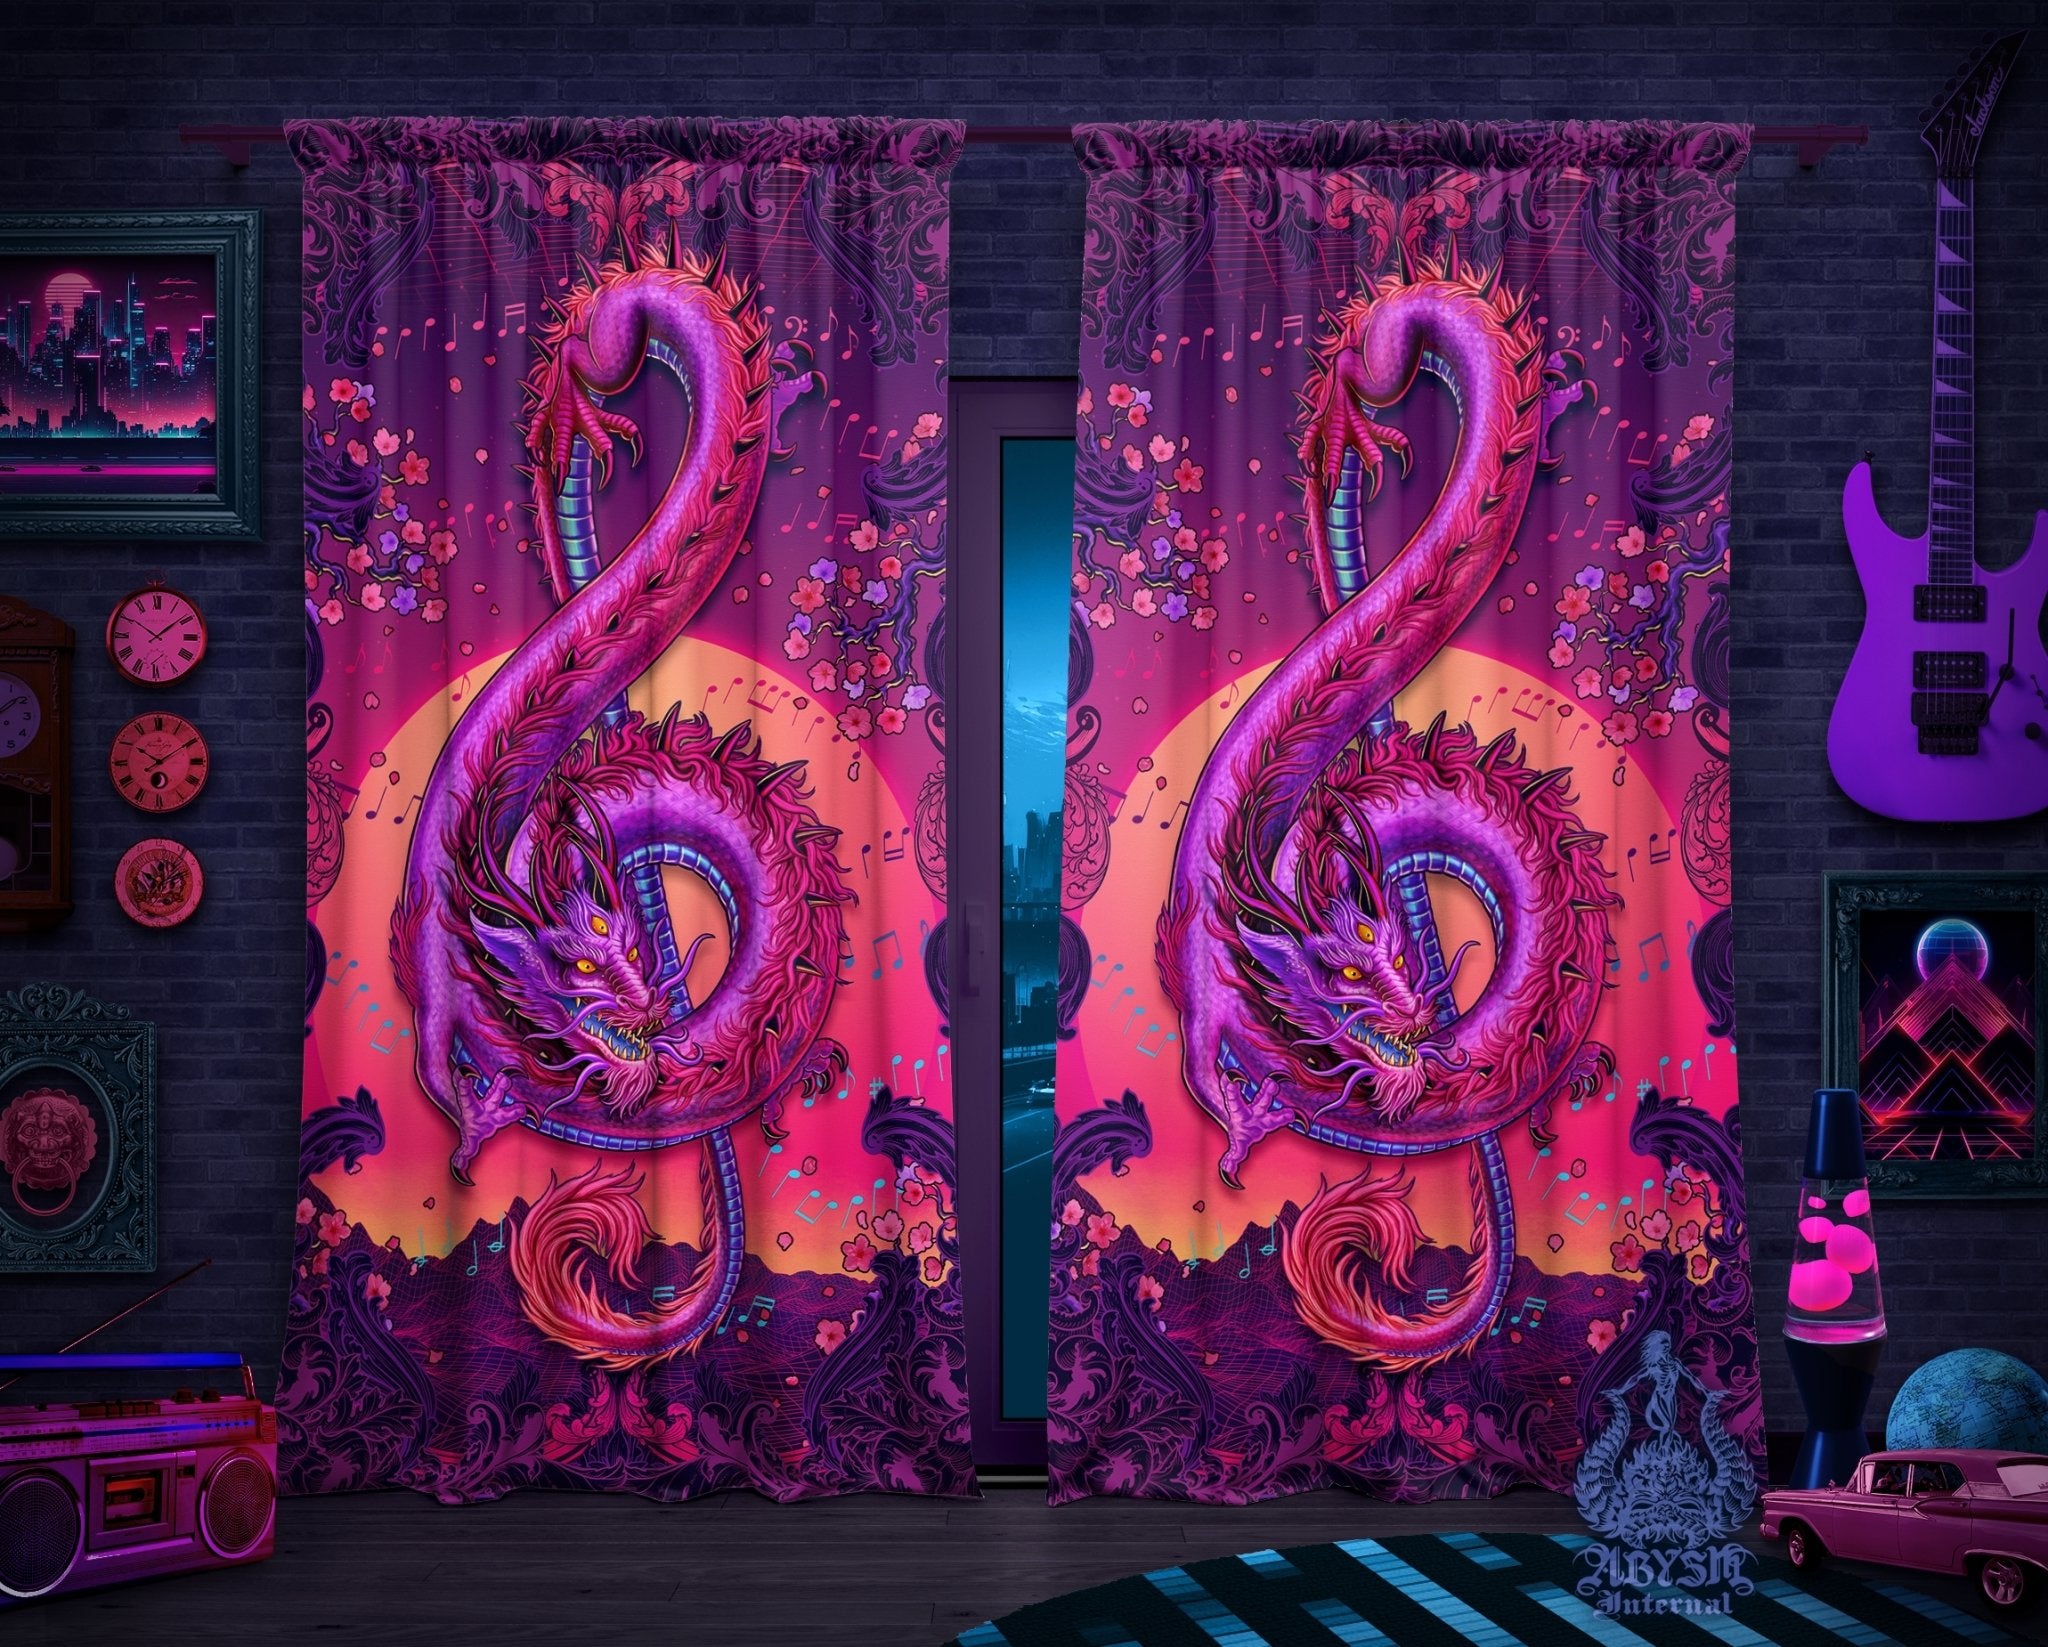 Synthwave Blackout Curtains, Long Window Panels, Psychedelic Art Print, Vaporwave Room Decor, 80s Gamer Retrowave Home and Shop Decor - Music Dragon - Abysm Internal